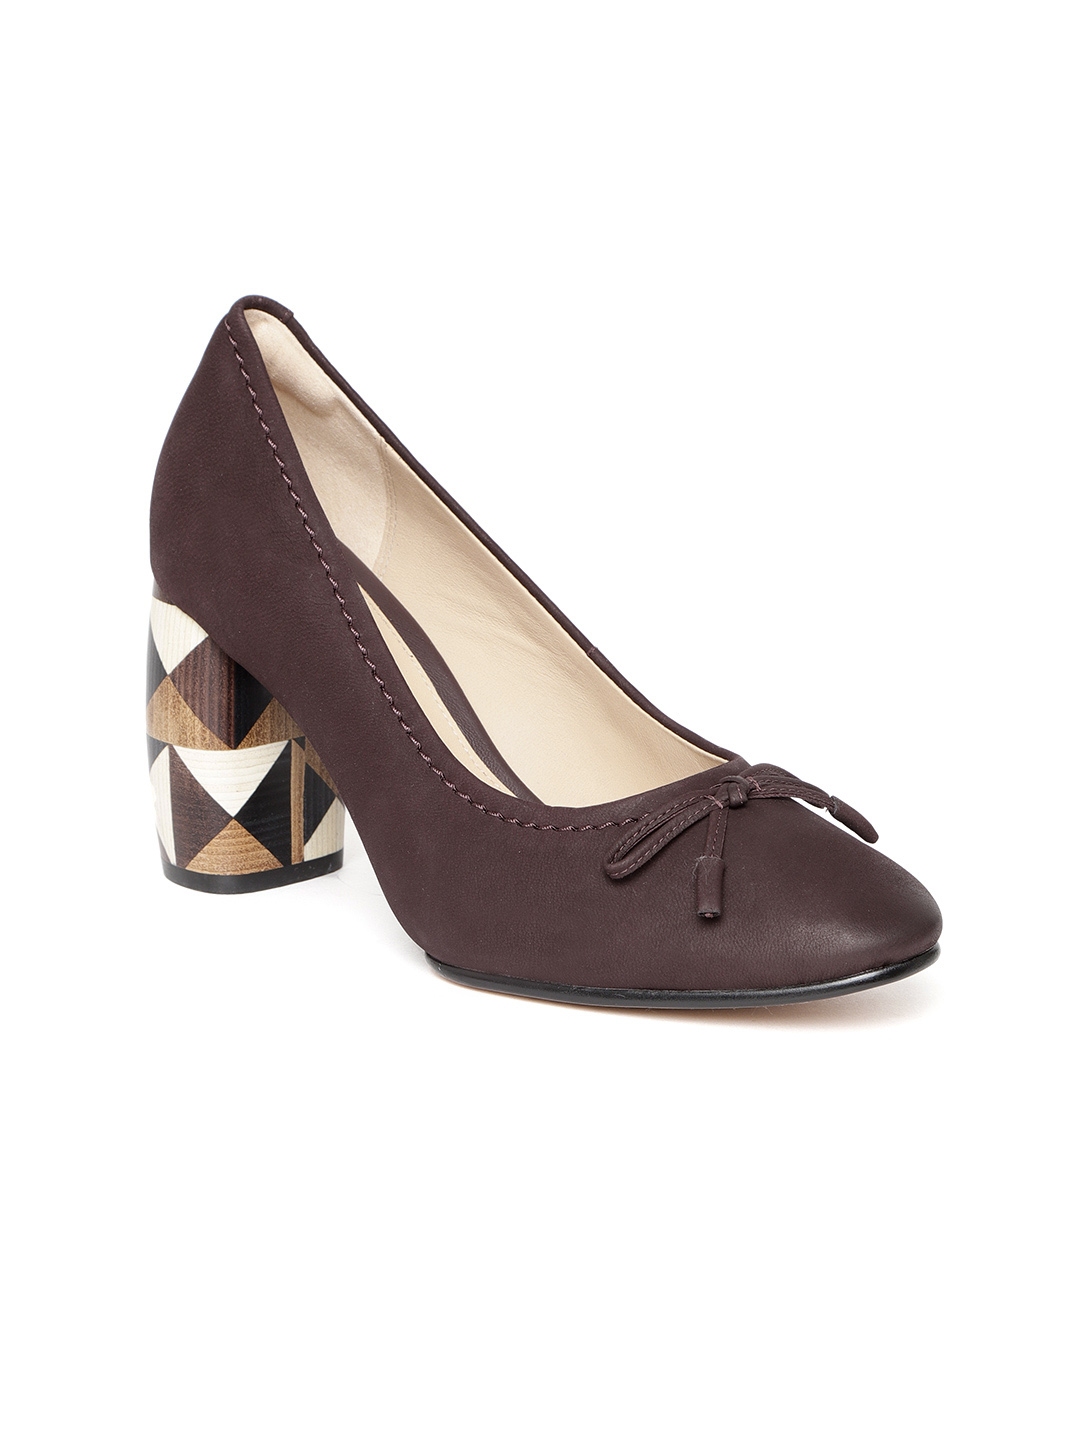 Buy Clarks Women Burgundy Leather Solid 